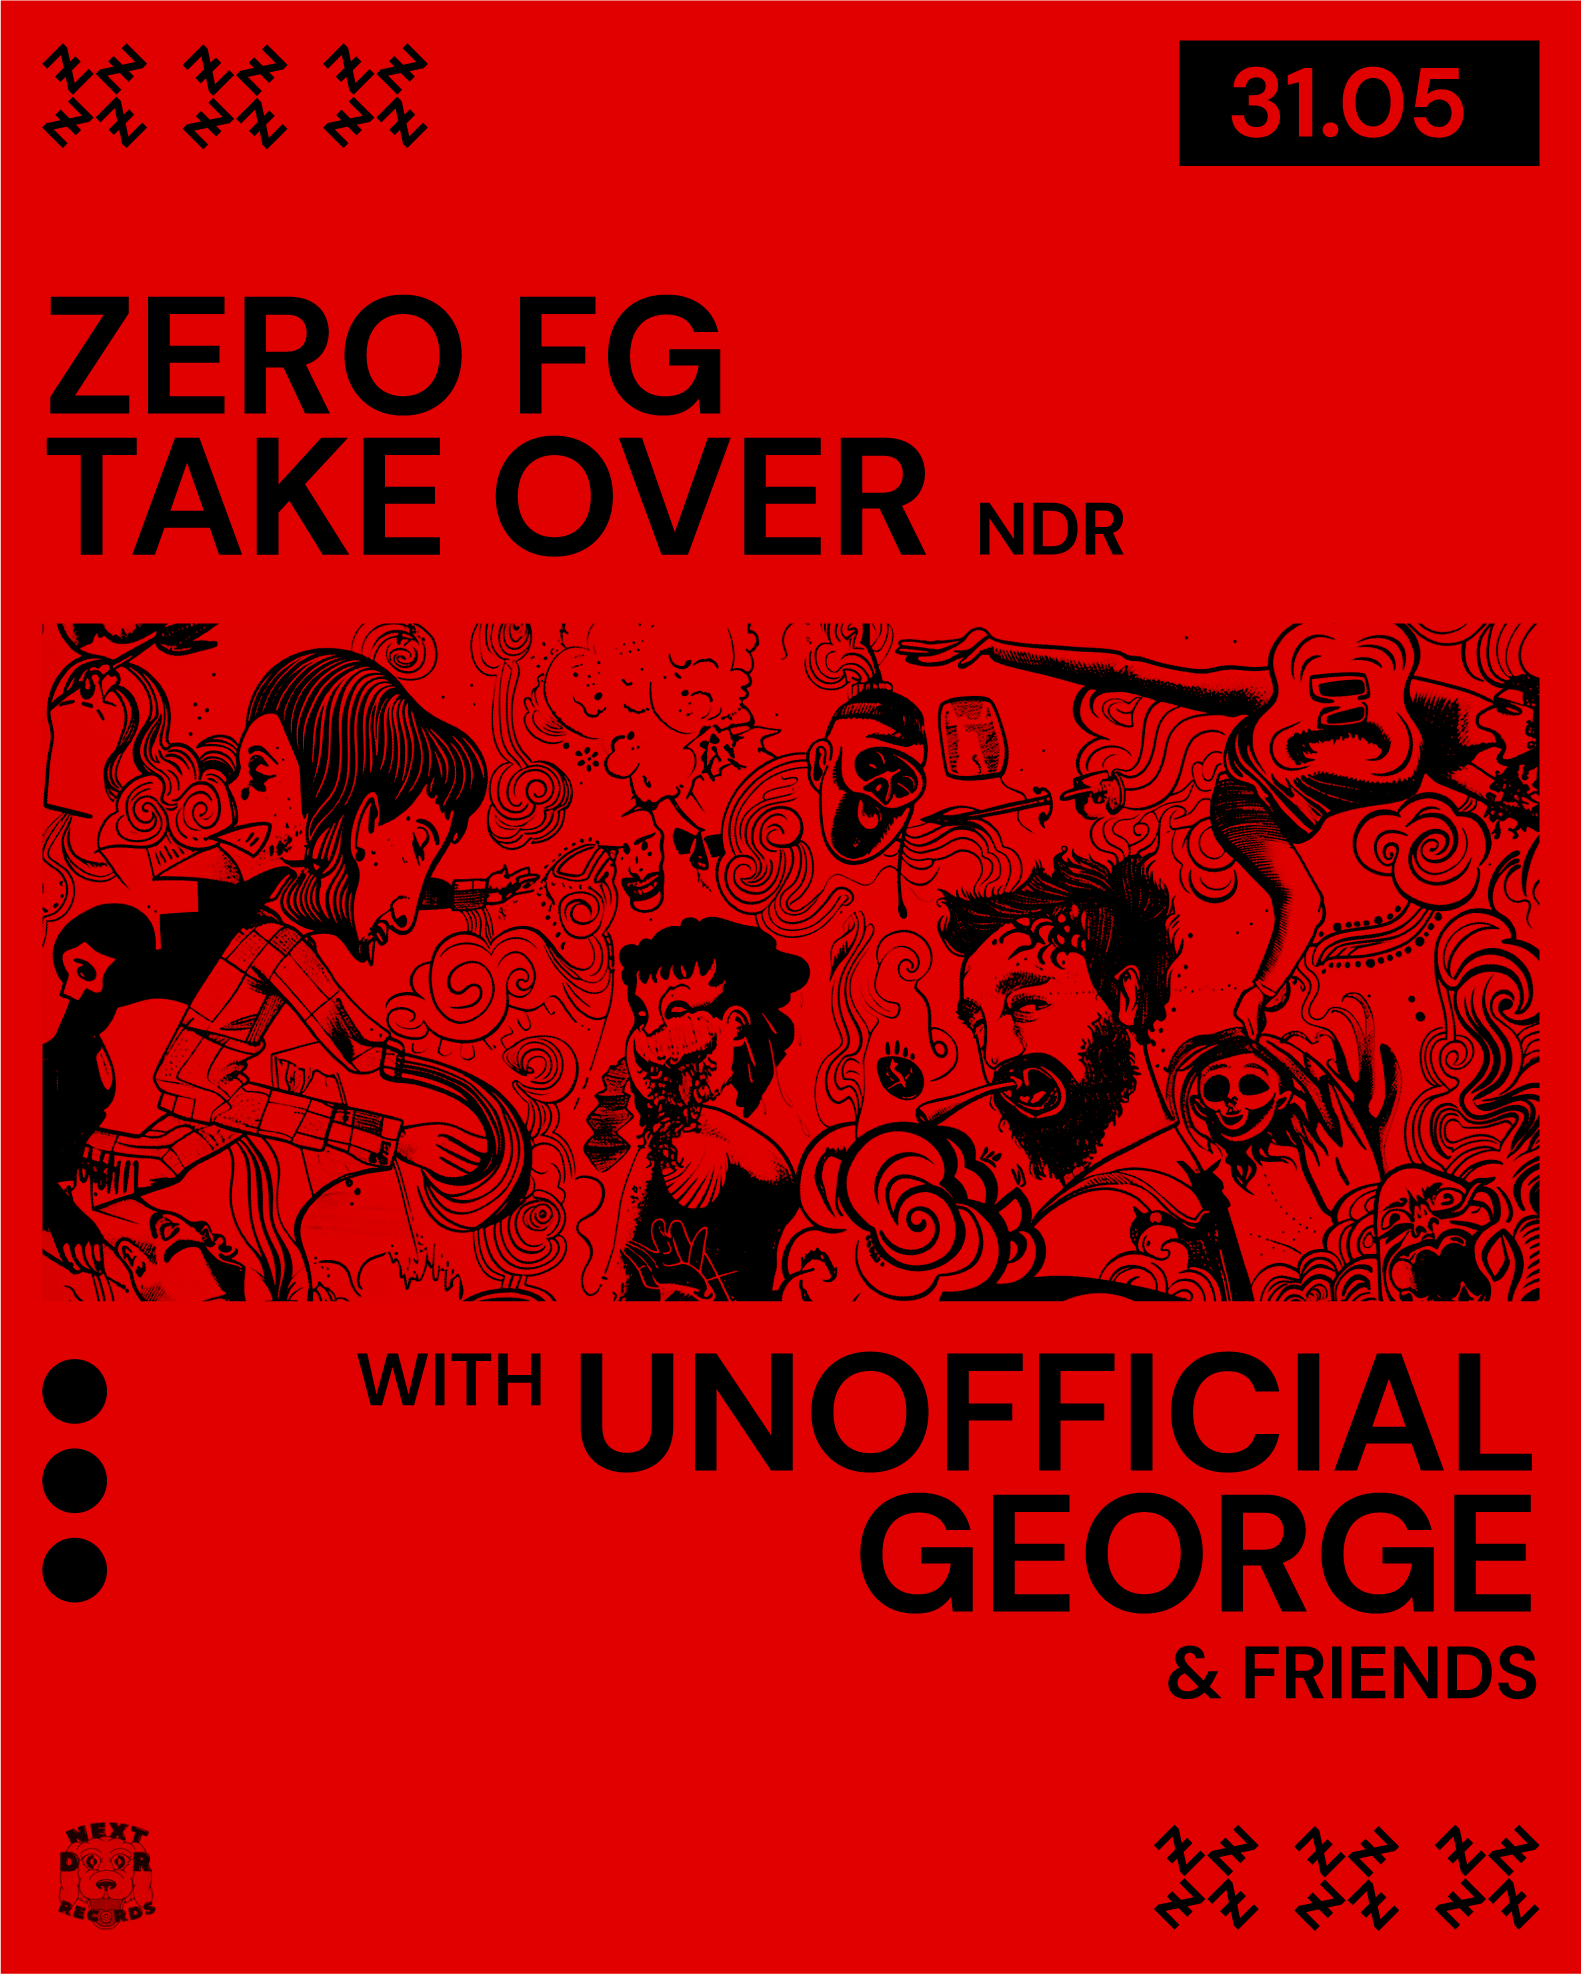 Zero FG Takeover with Unofficial George - フライヤー表